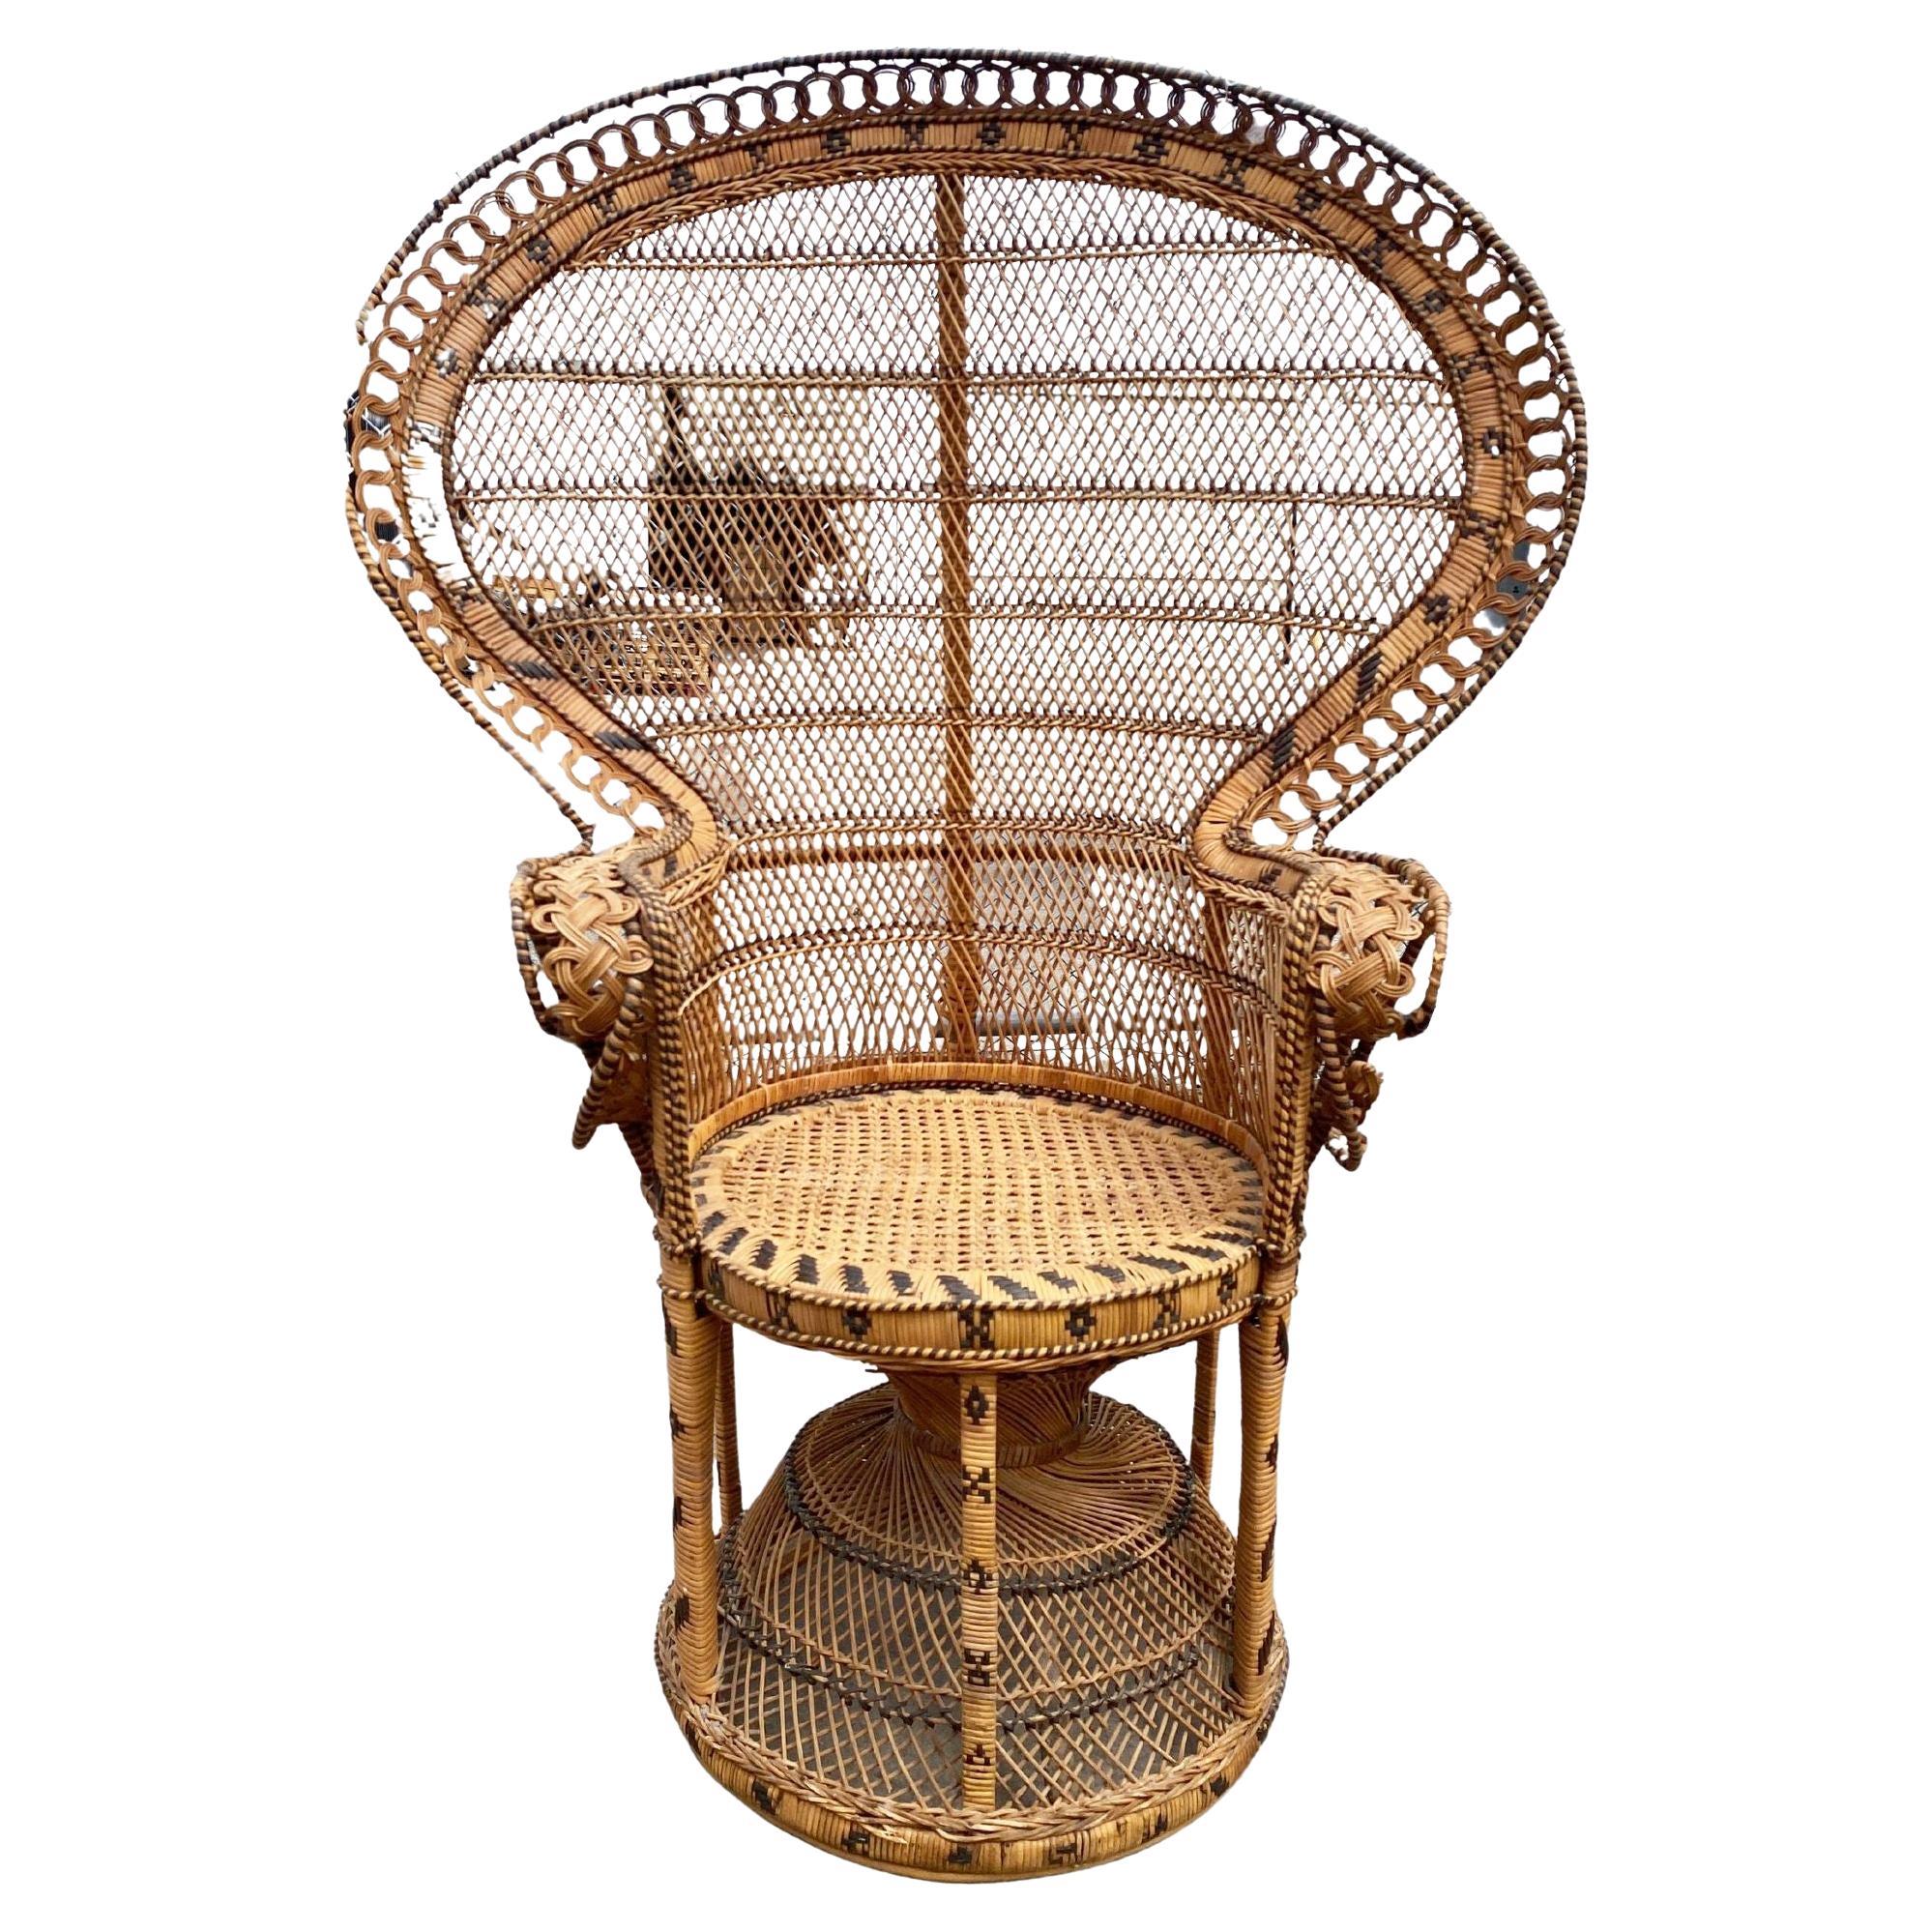 Restored Large Nude Natural Woven Wicker "Cobra" Lounge Throne Chair